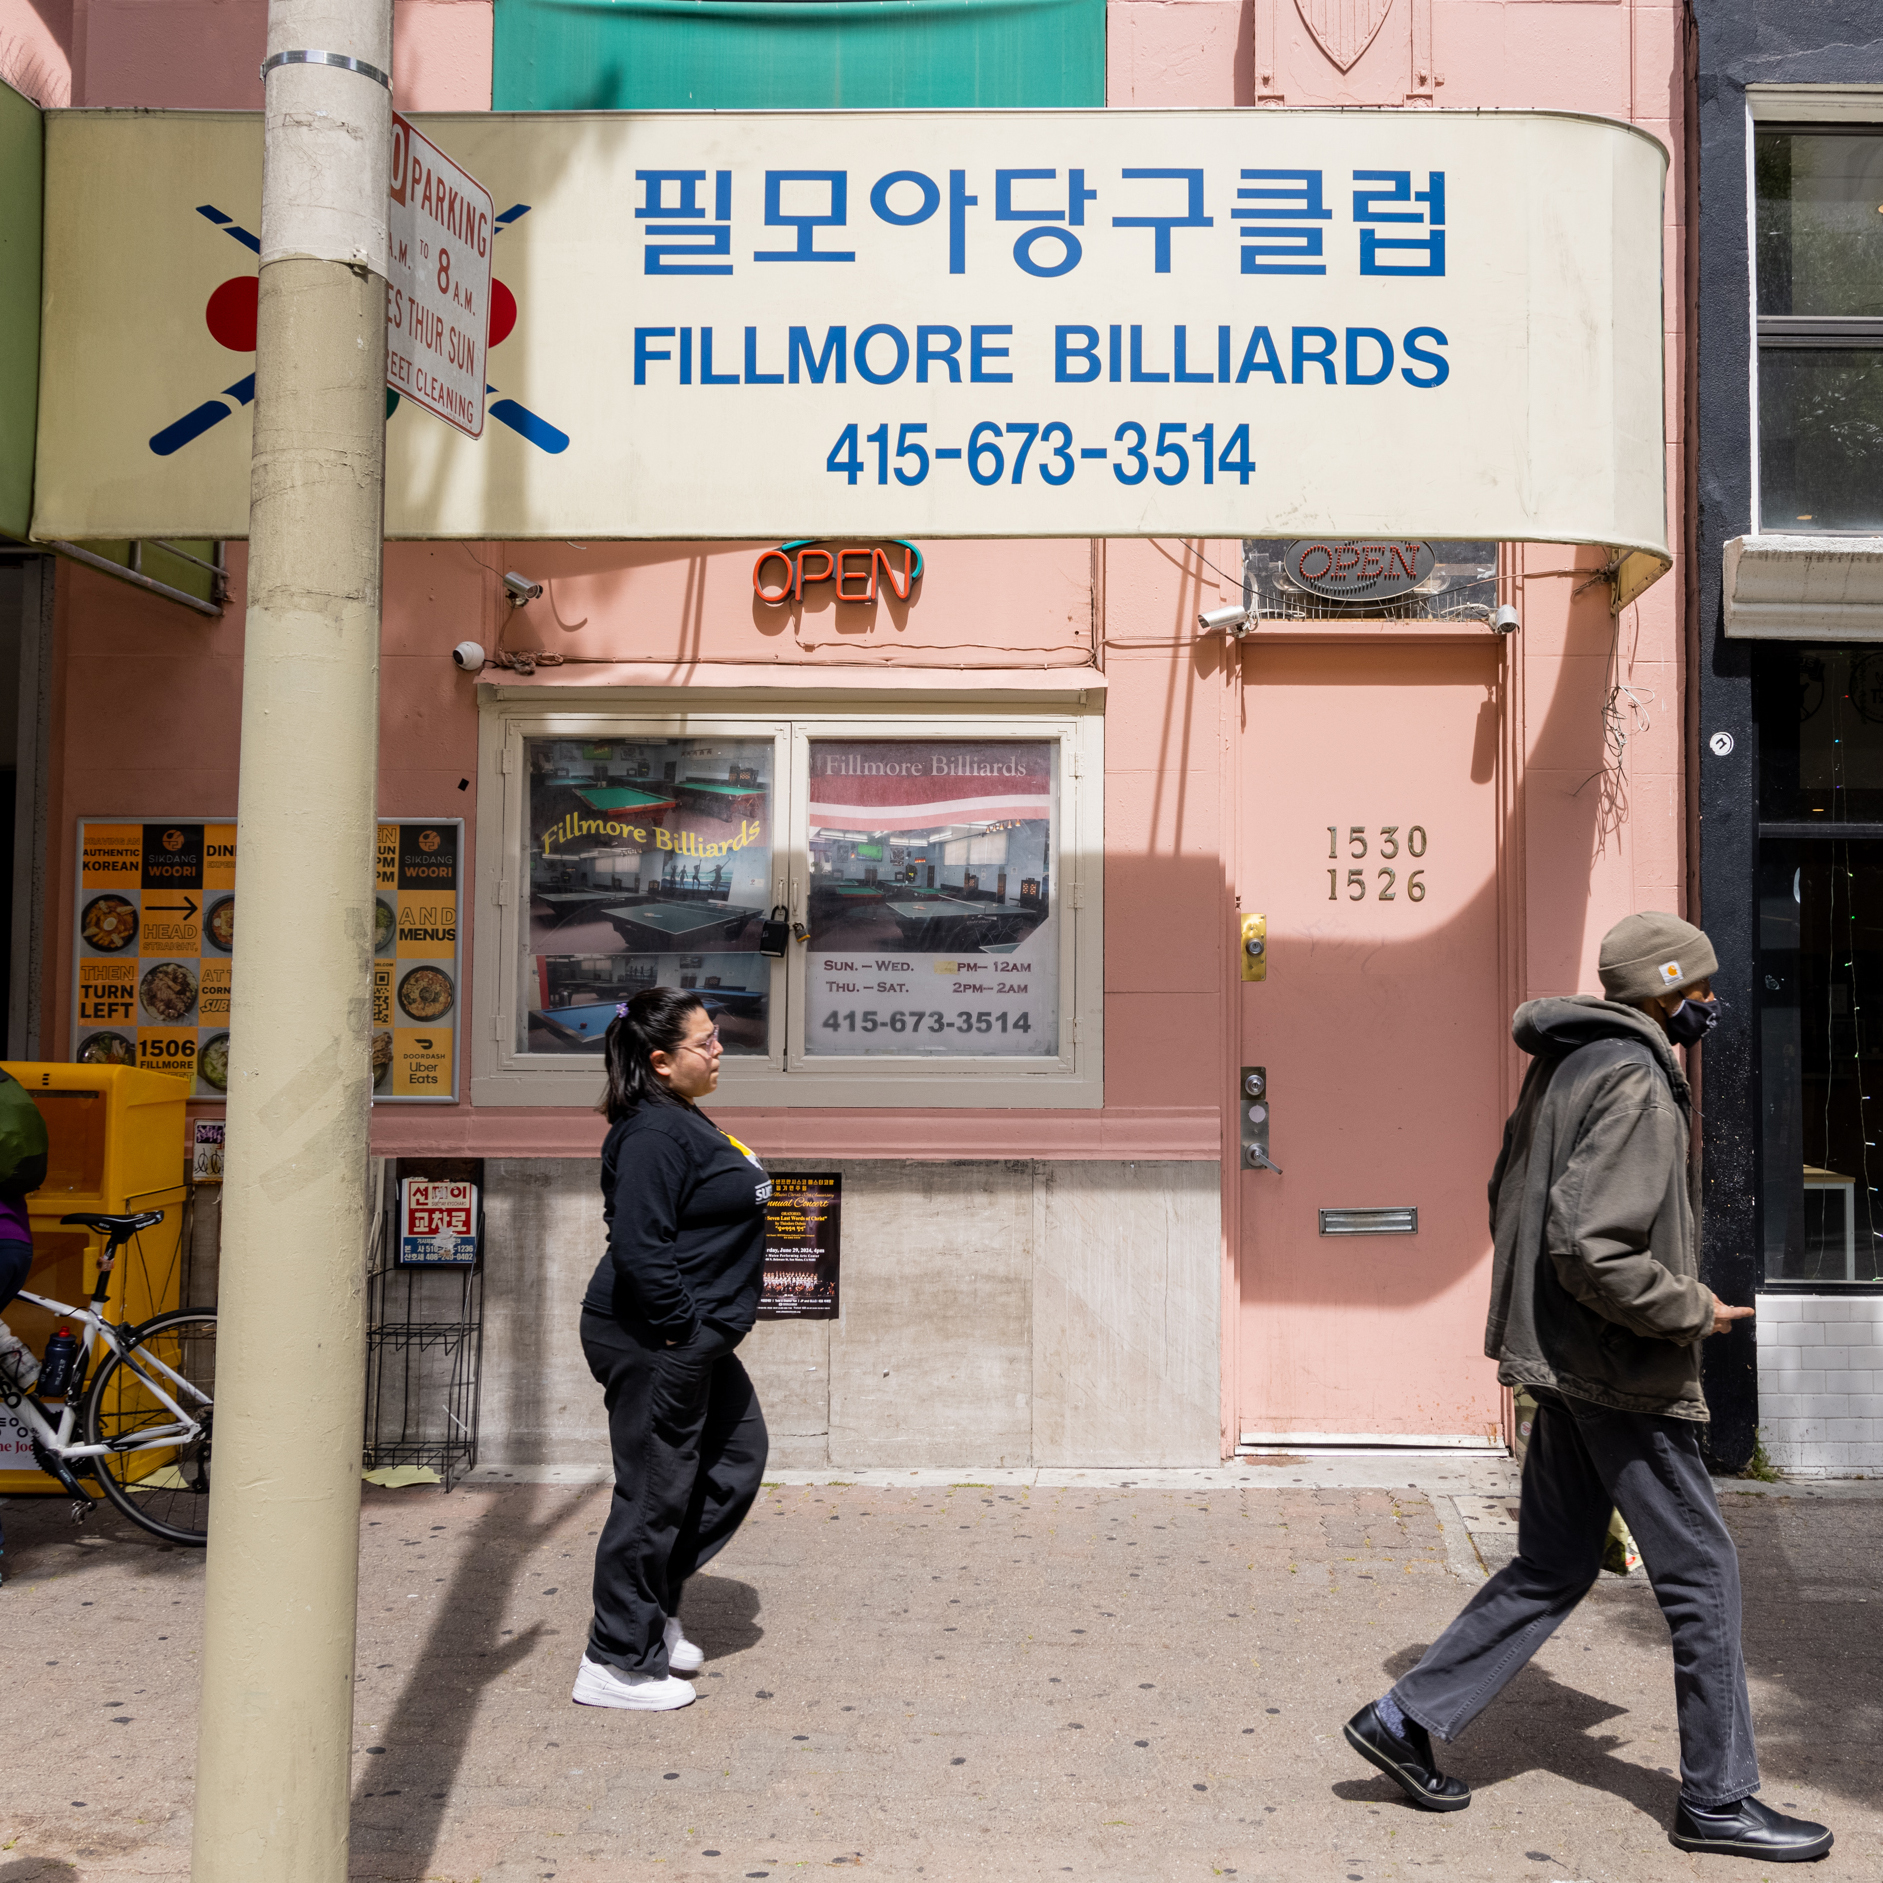 The image depicts two people walking past a pink building with a sign in both Korean and English for &quot;Fillmore Billiards,&quot; located at 1530-1526.